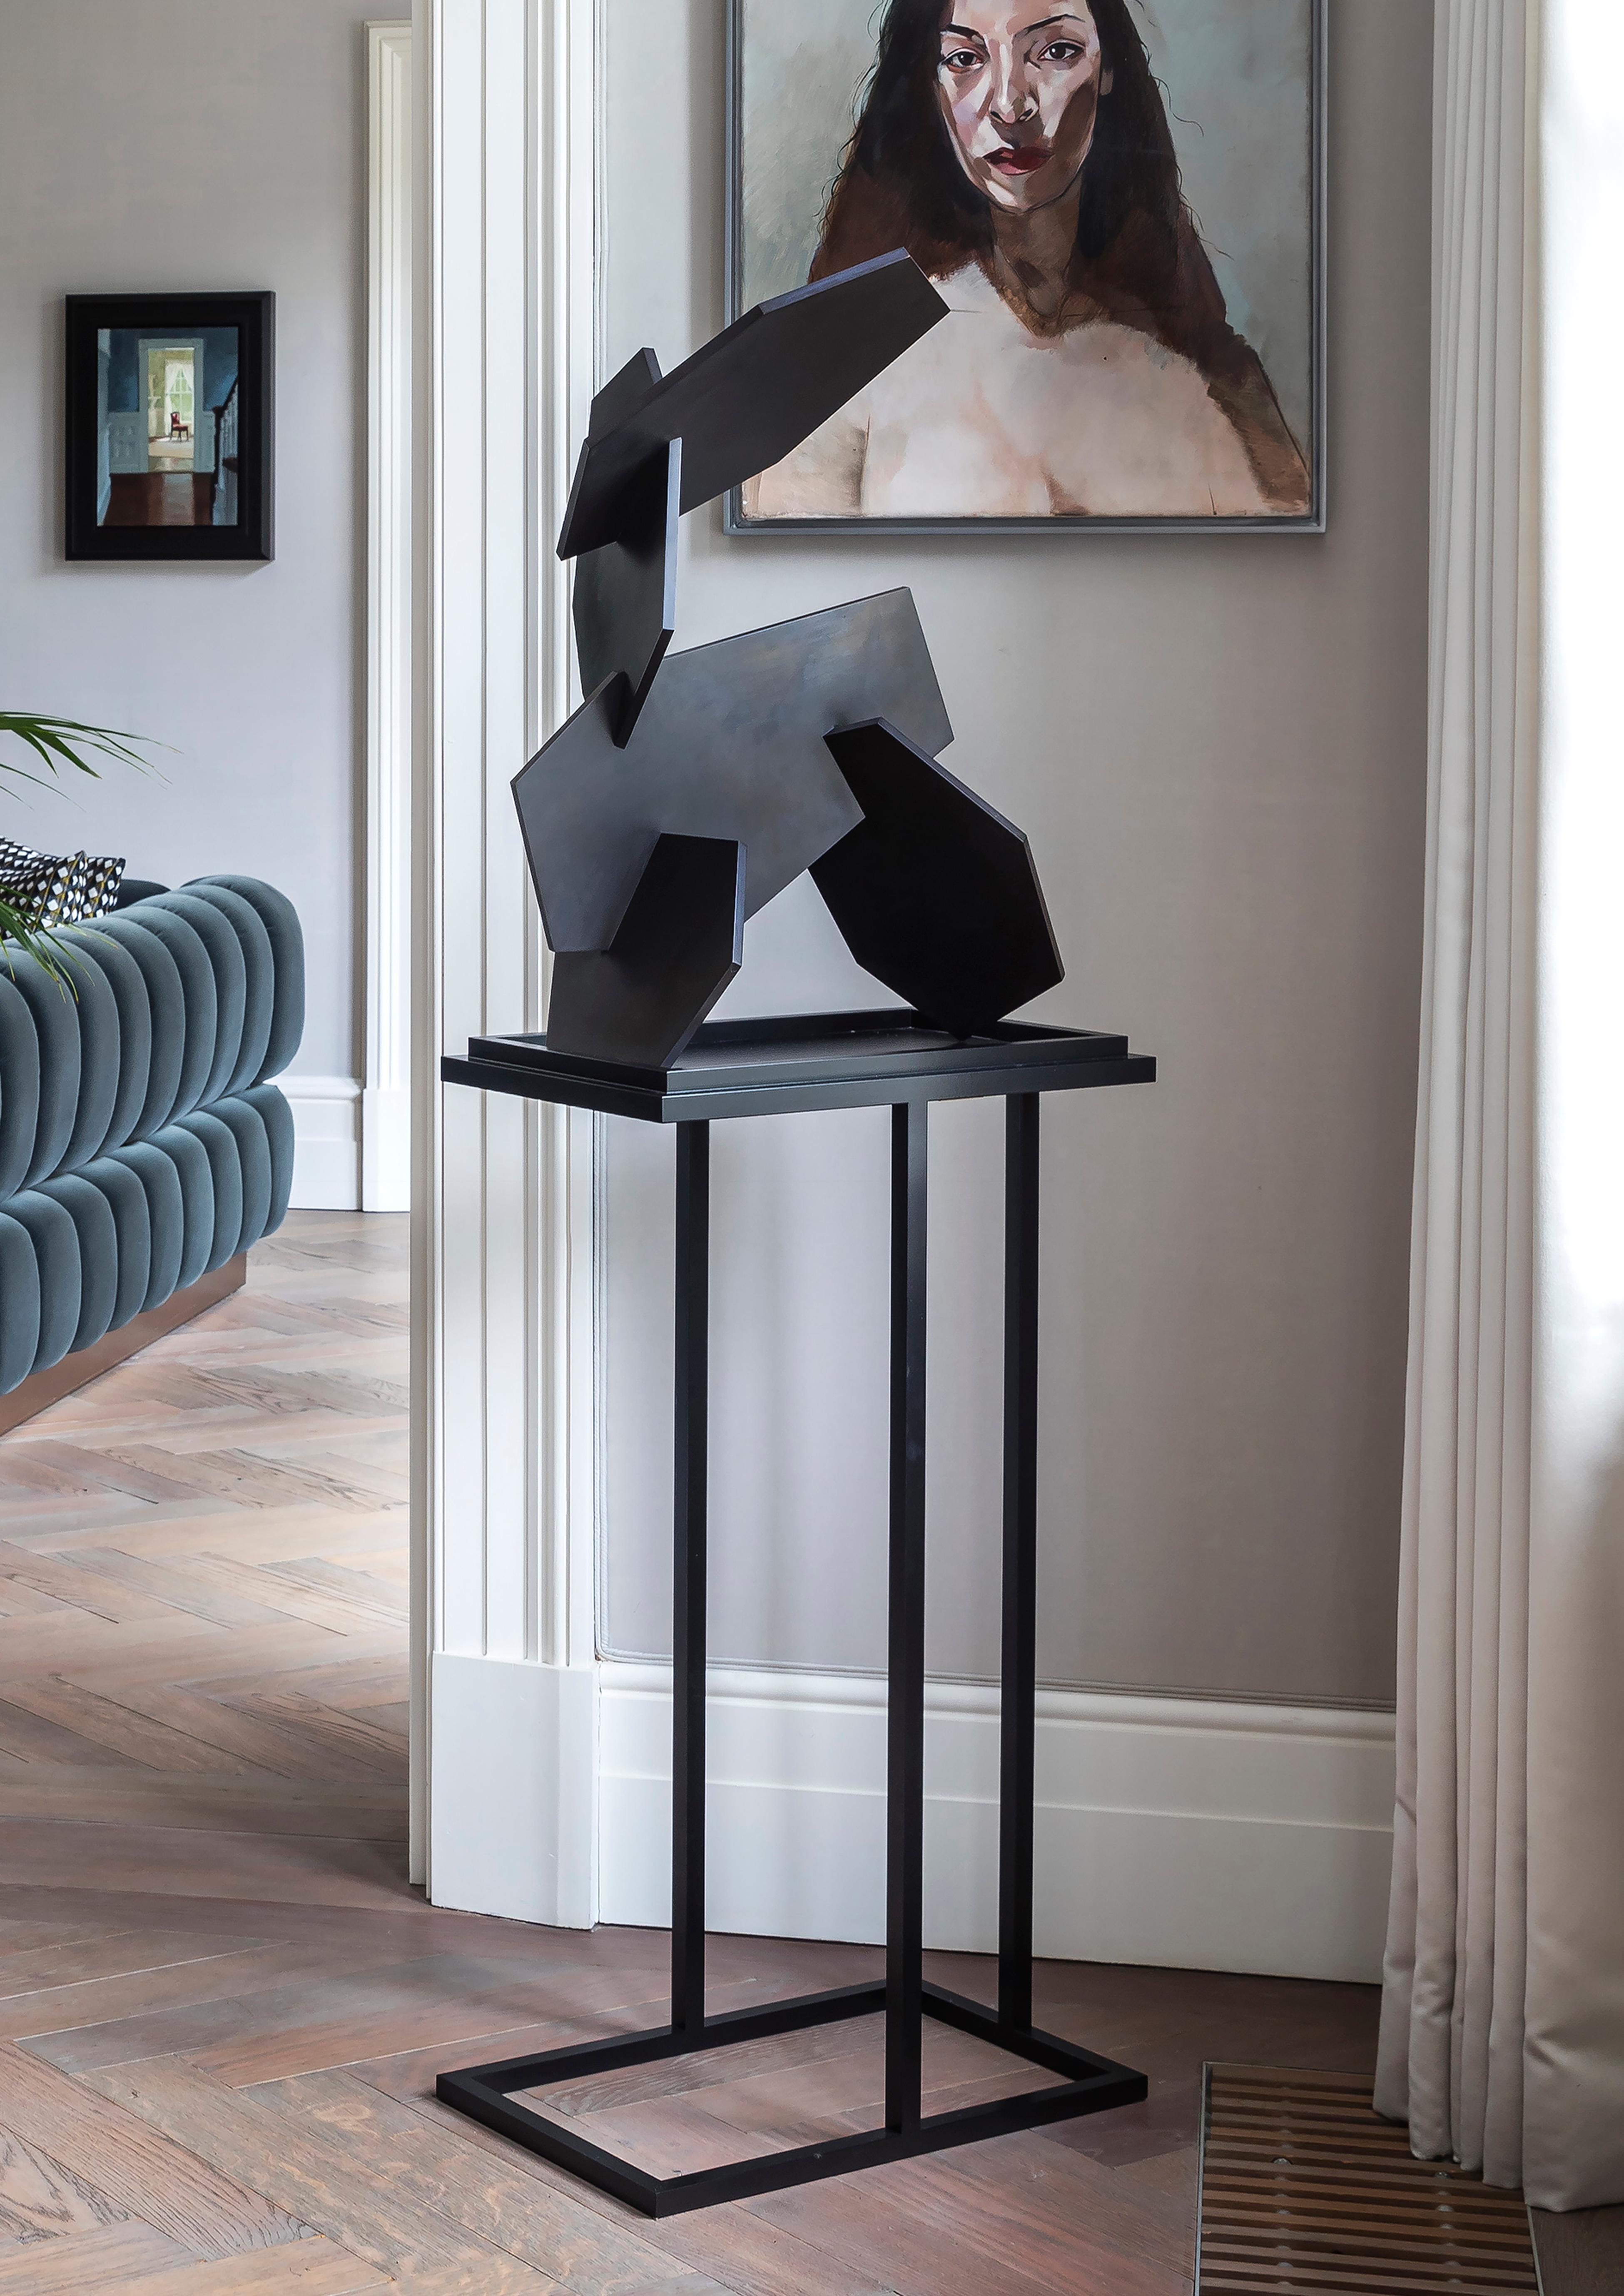 Brother to the Bacco side table, the Bacco Pedestal possesses the strong lines and masculine glamour that the Bacco collection is known for, while also exuding a chic elegance due to its cantilevered design. Appearing as though it is floating in